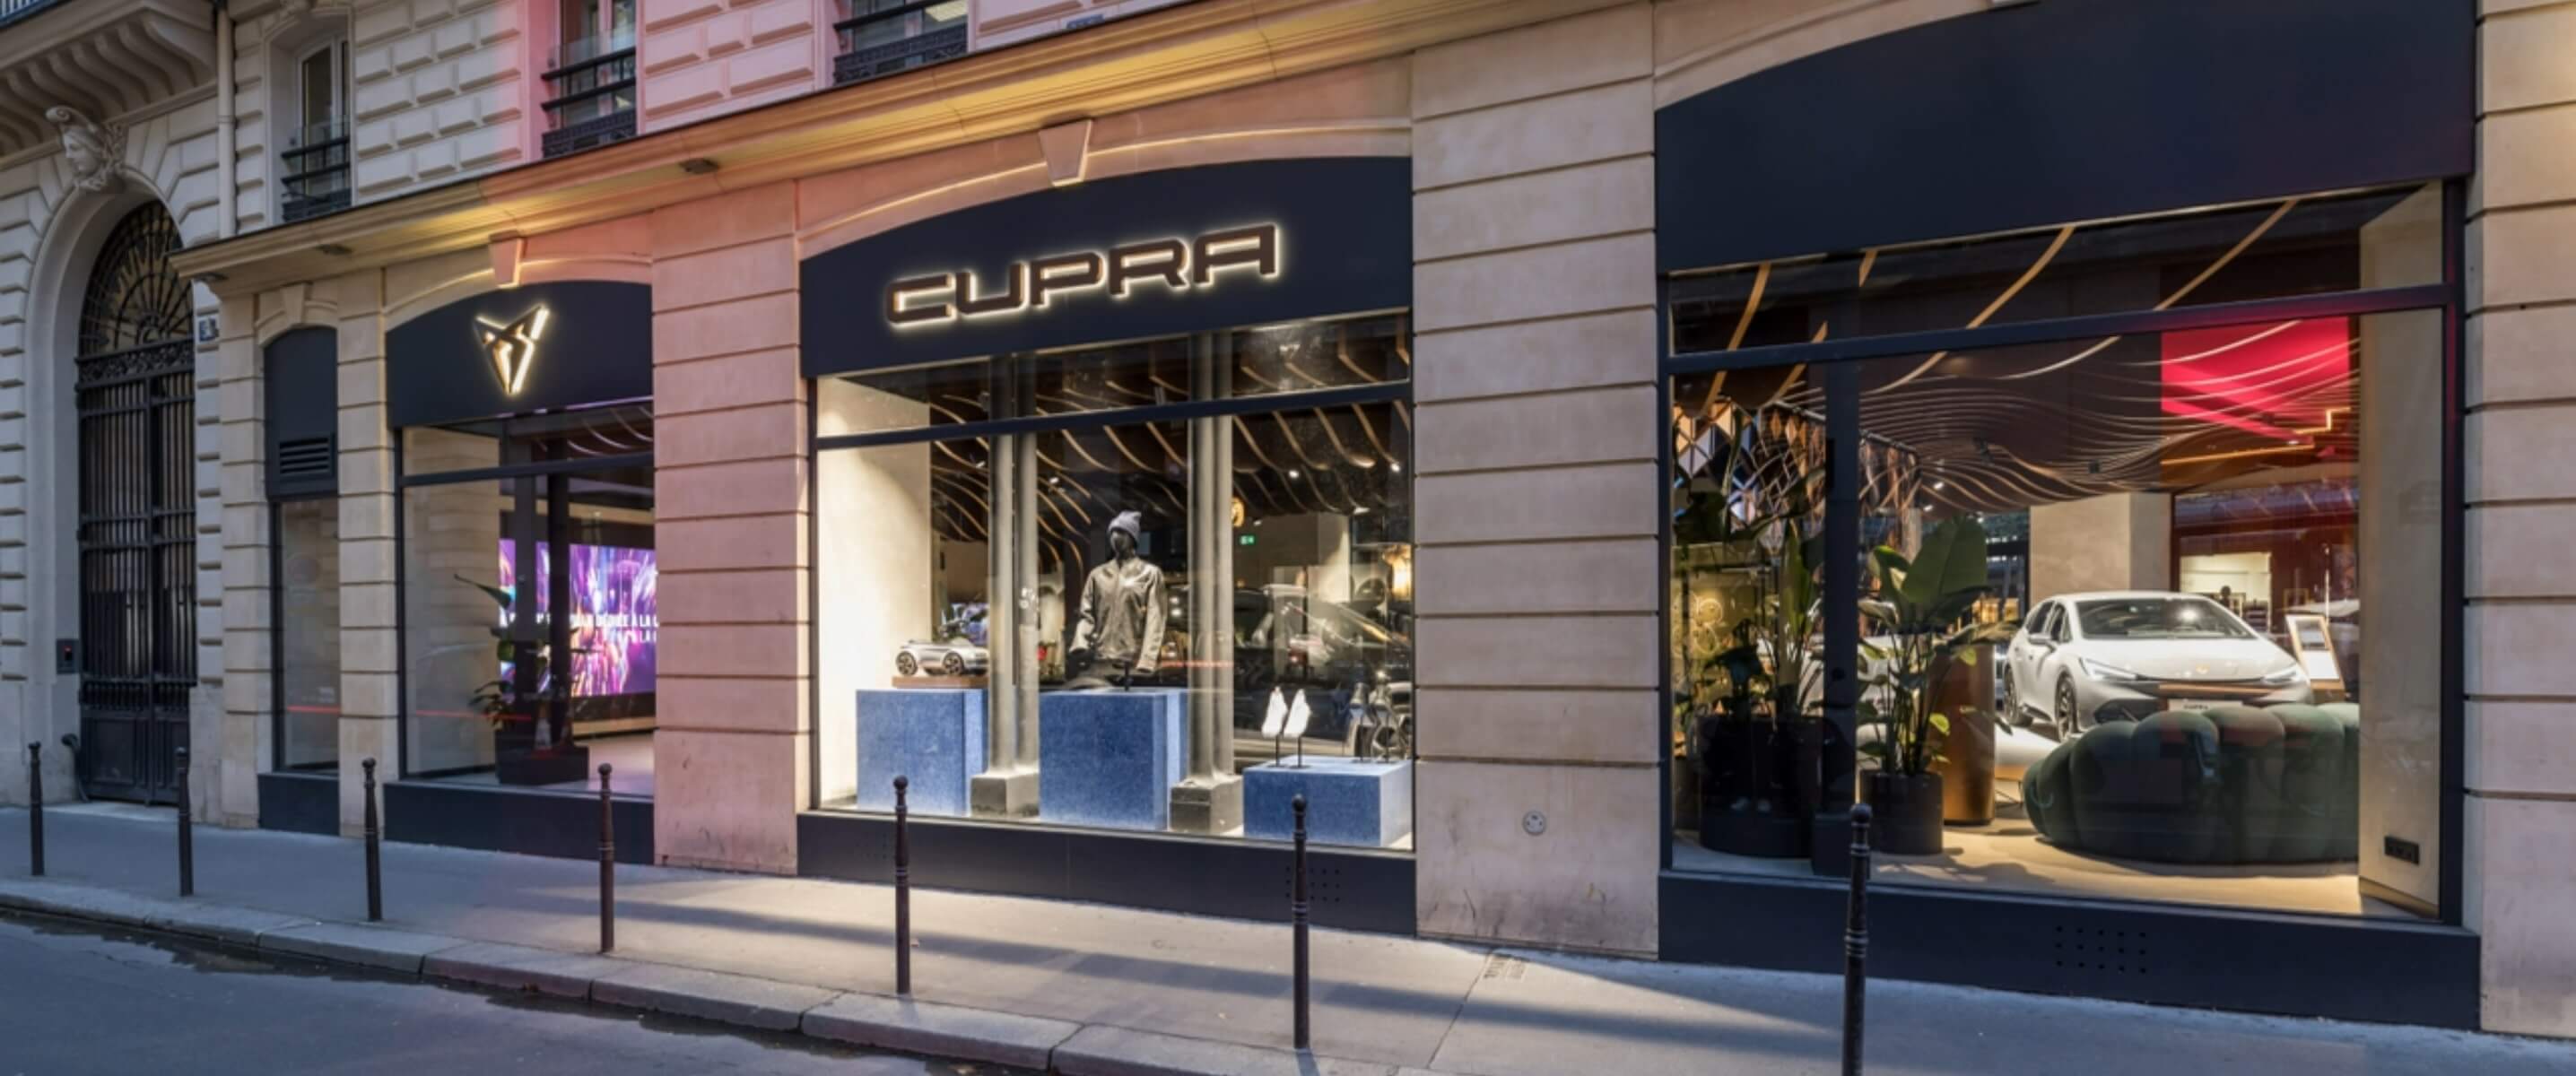 CUPRA lands in Paris with opening of new City Garage